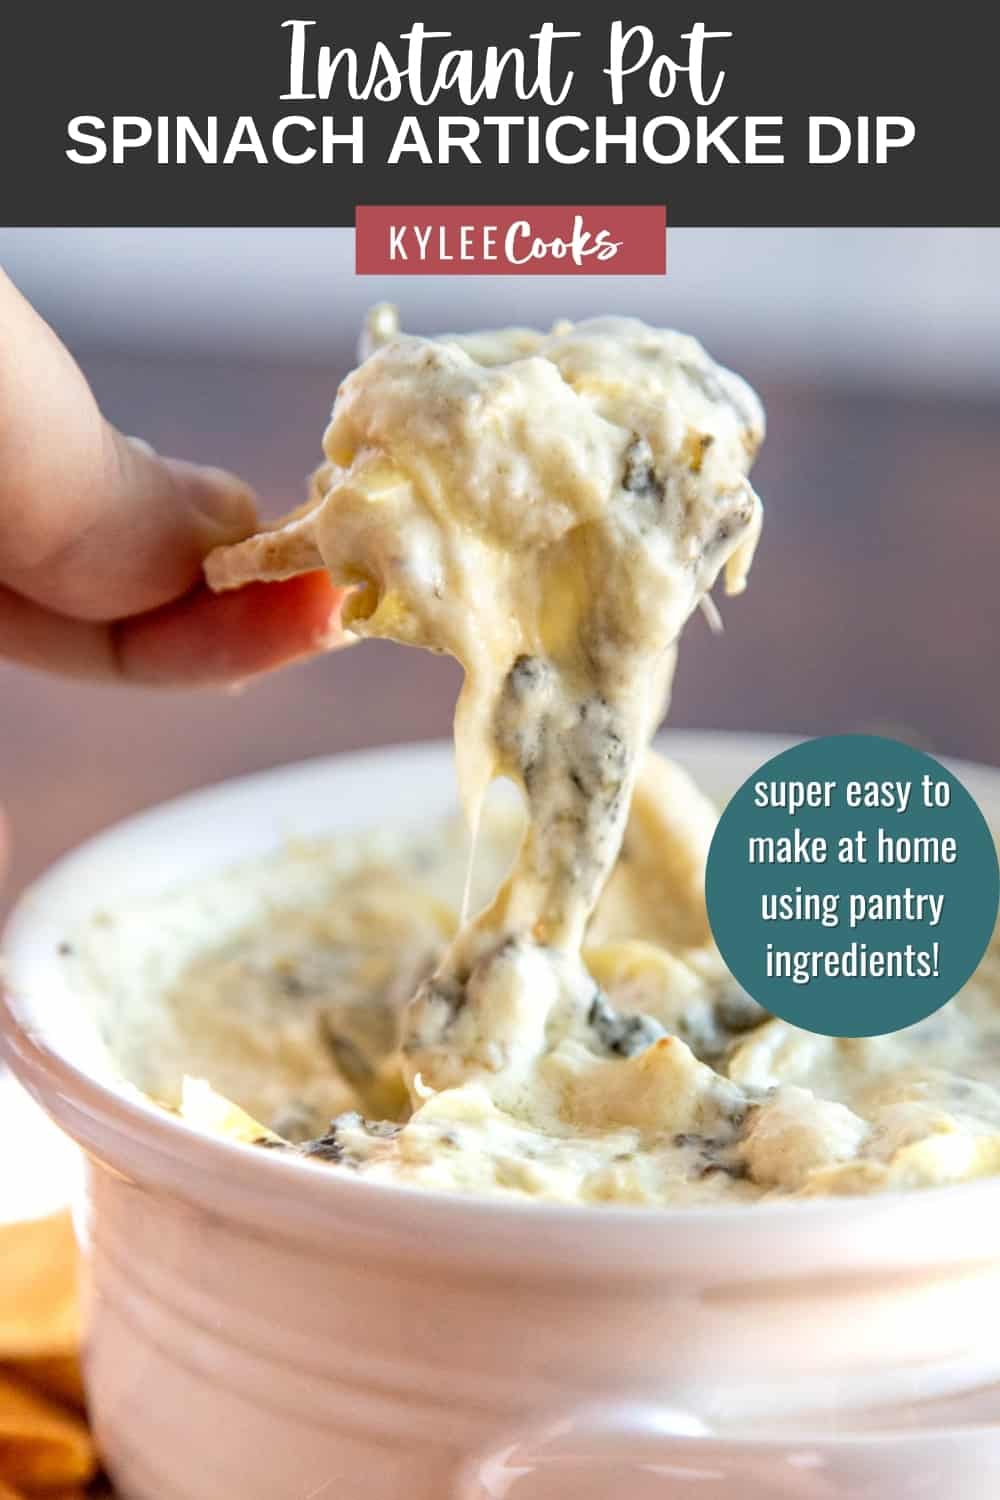 spinach artichoke dip being pulled from a bowl with garlic bread with text overlay